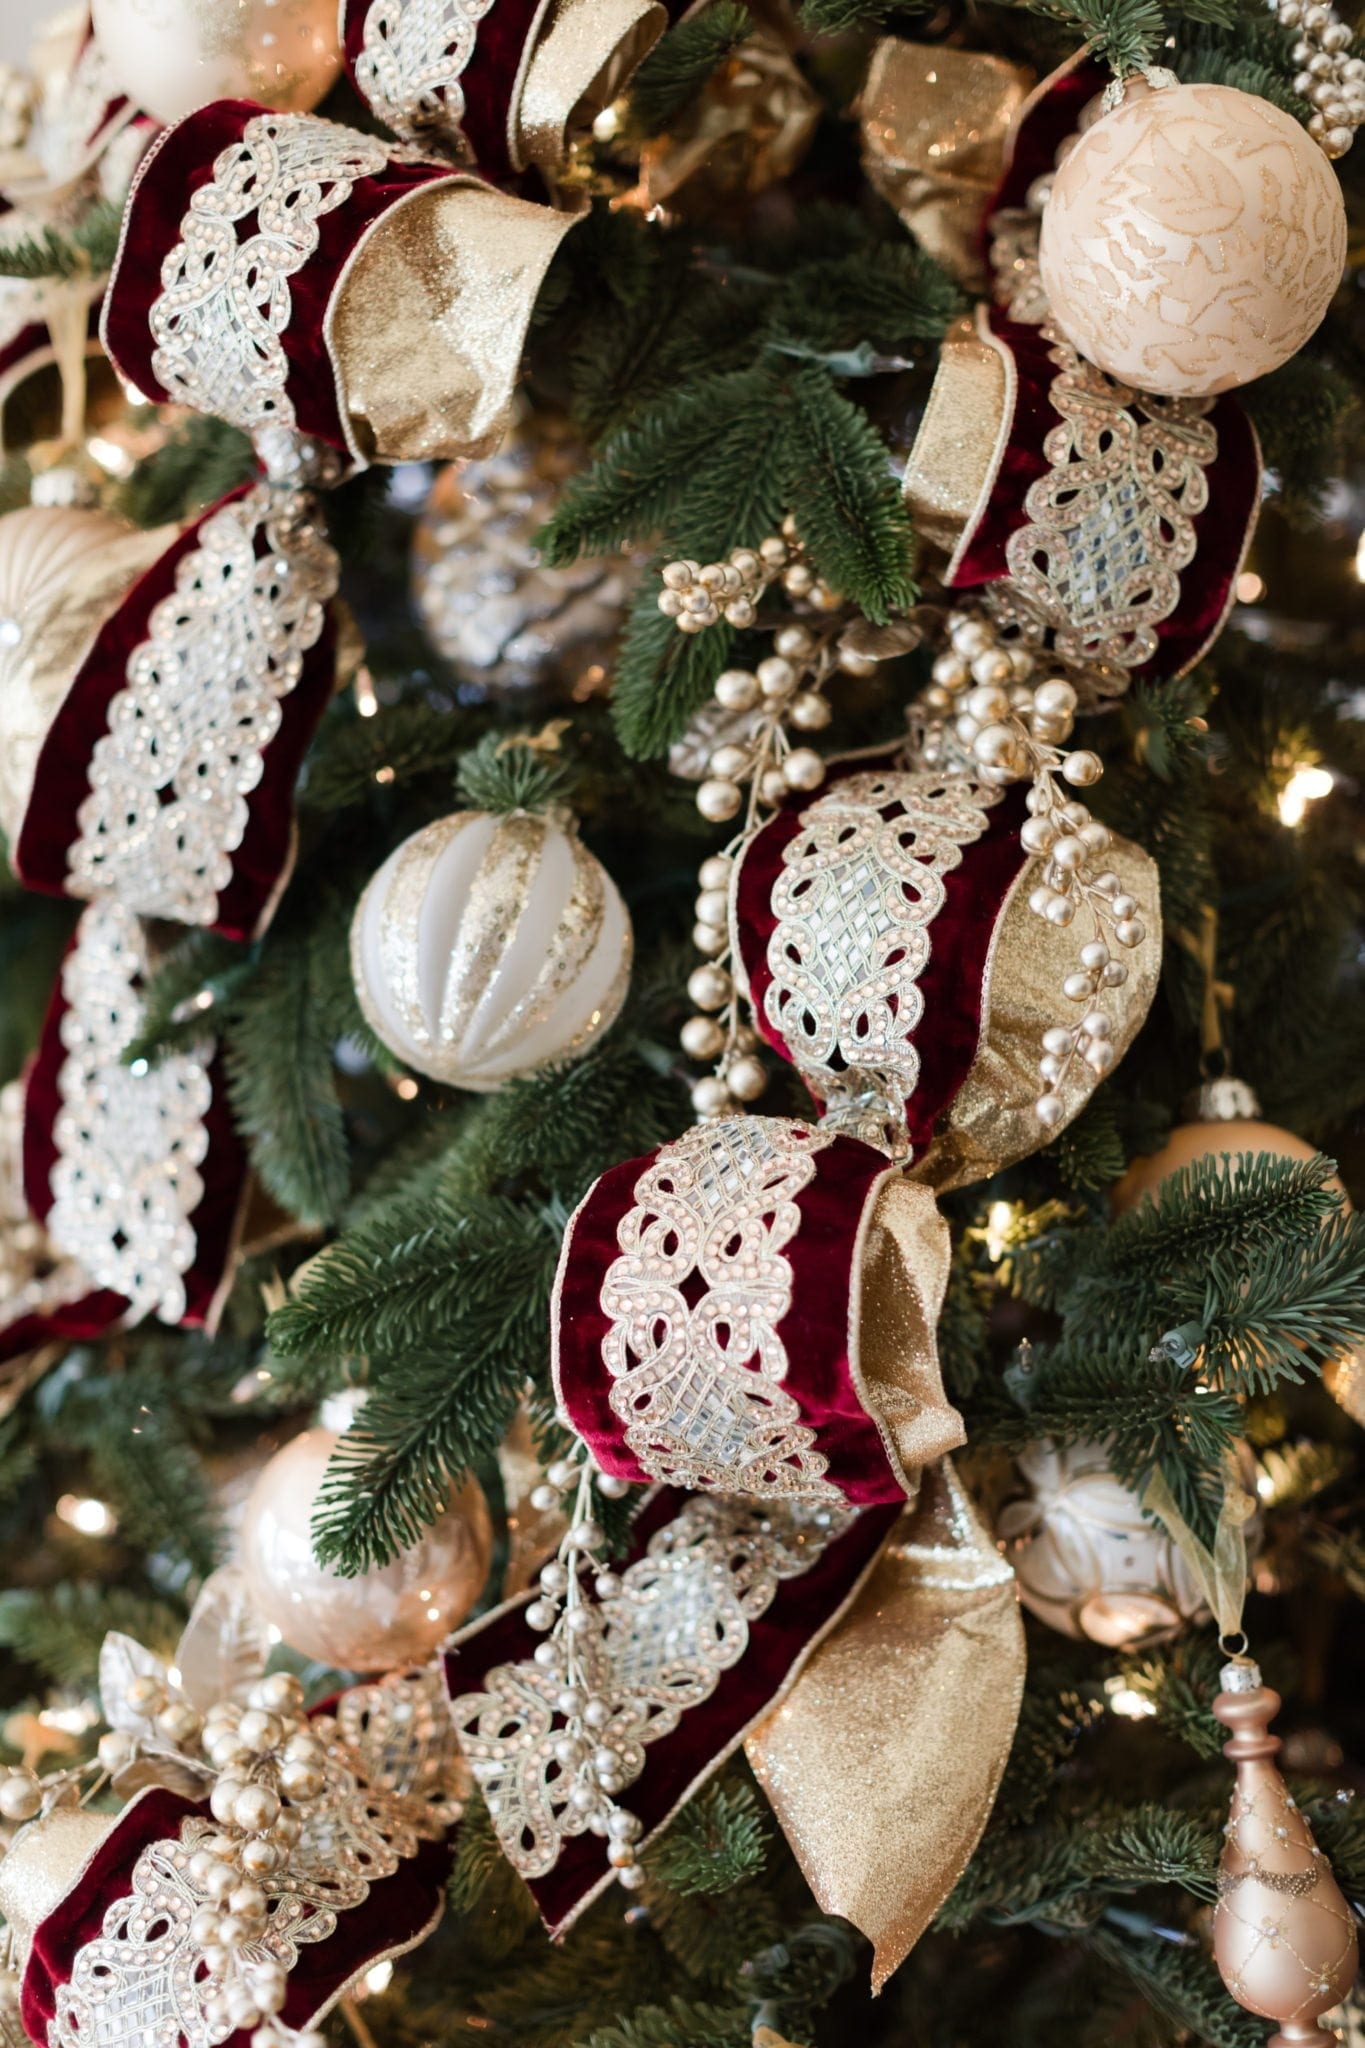 Ornament collection of gold and silver mixed in with ornate gold ribbon.